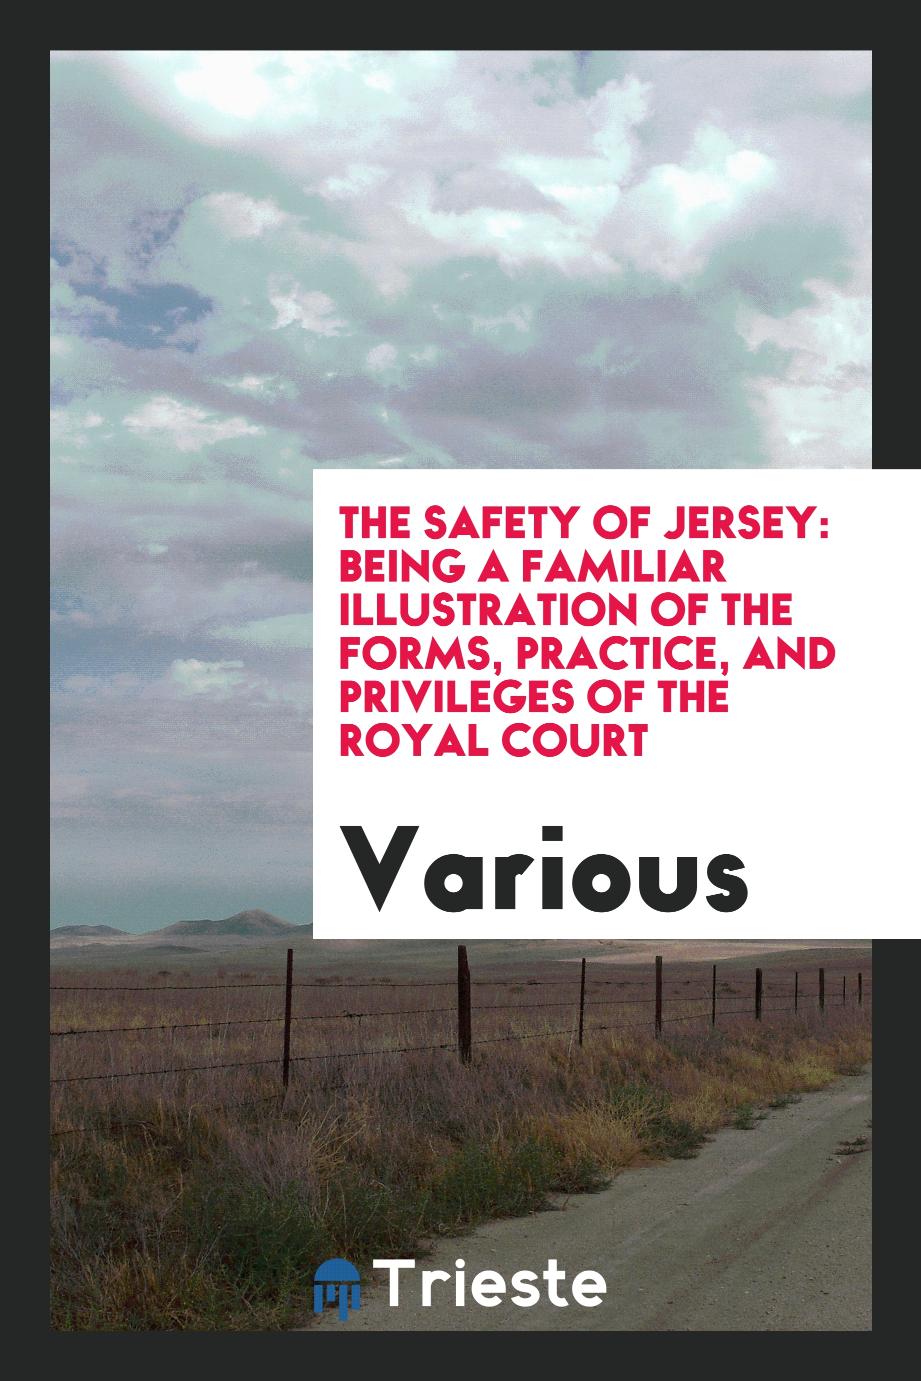 The safety of Jersey: being a familiar illustration of the forms, practice, and privileges of the Royal Court